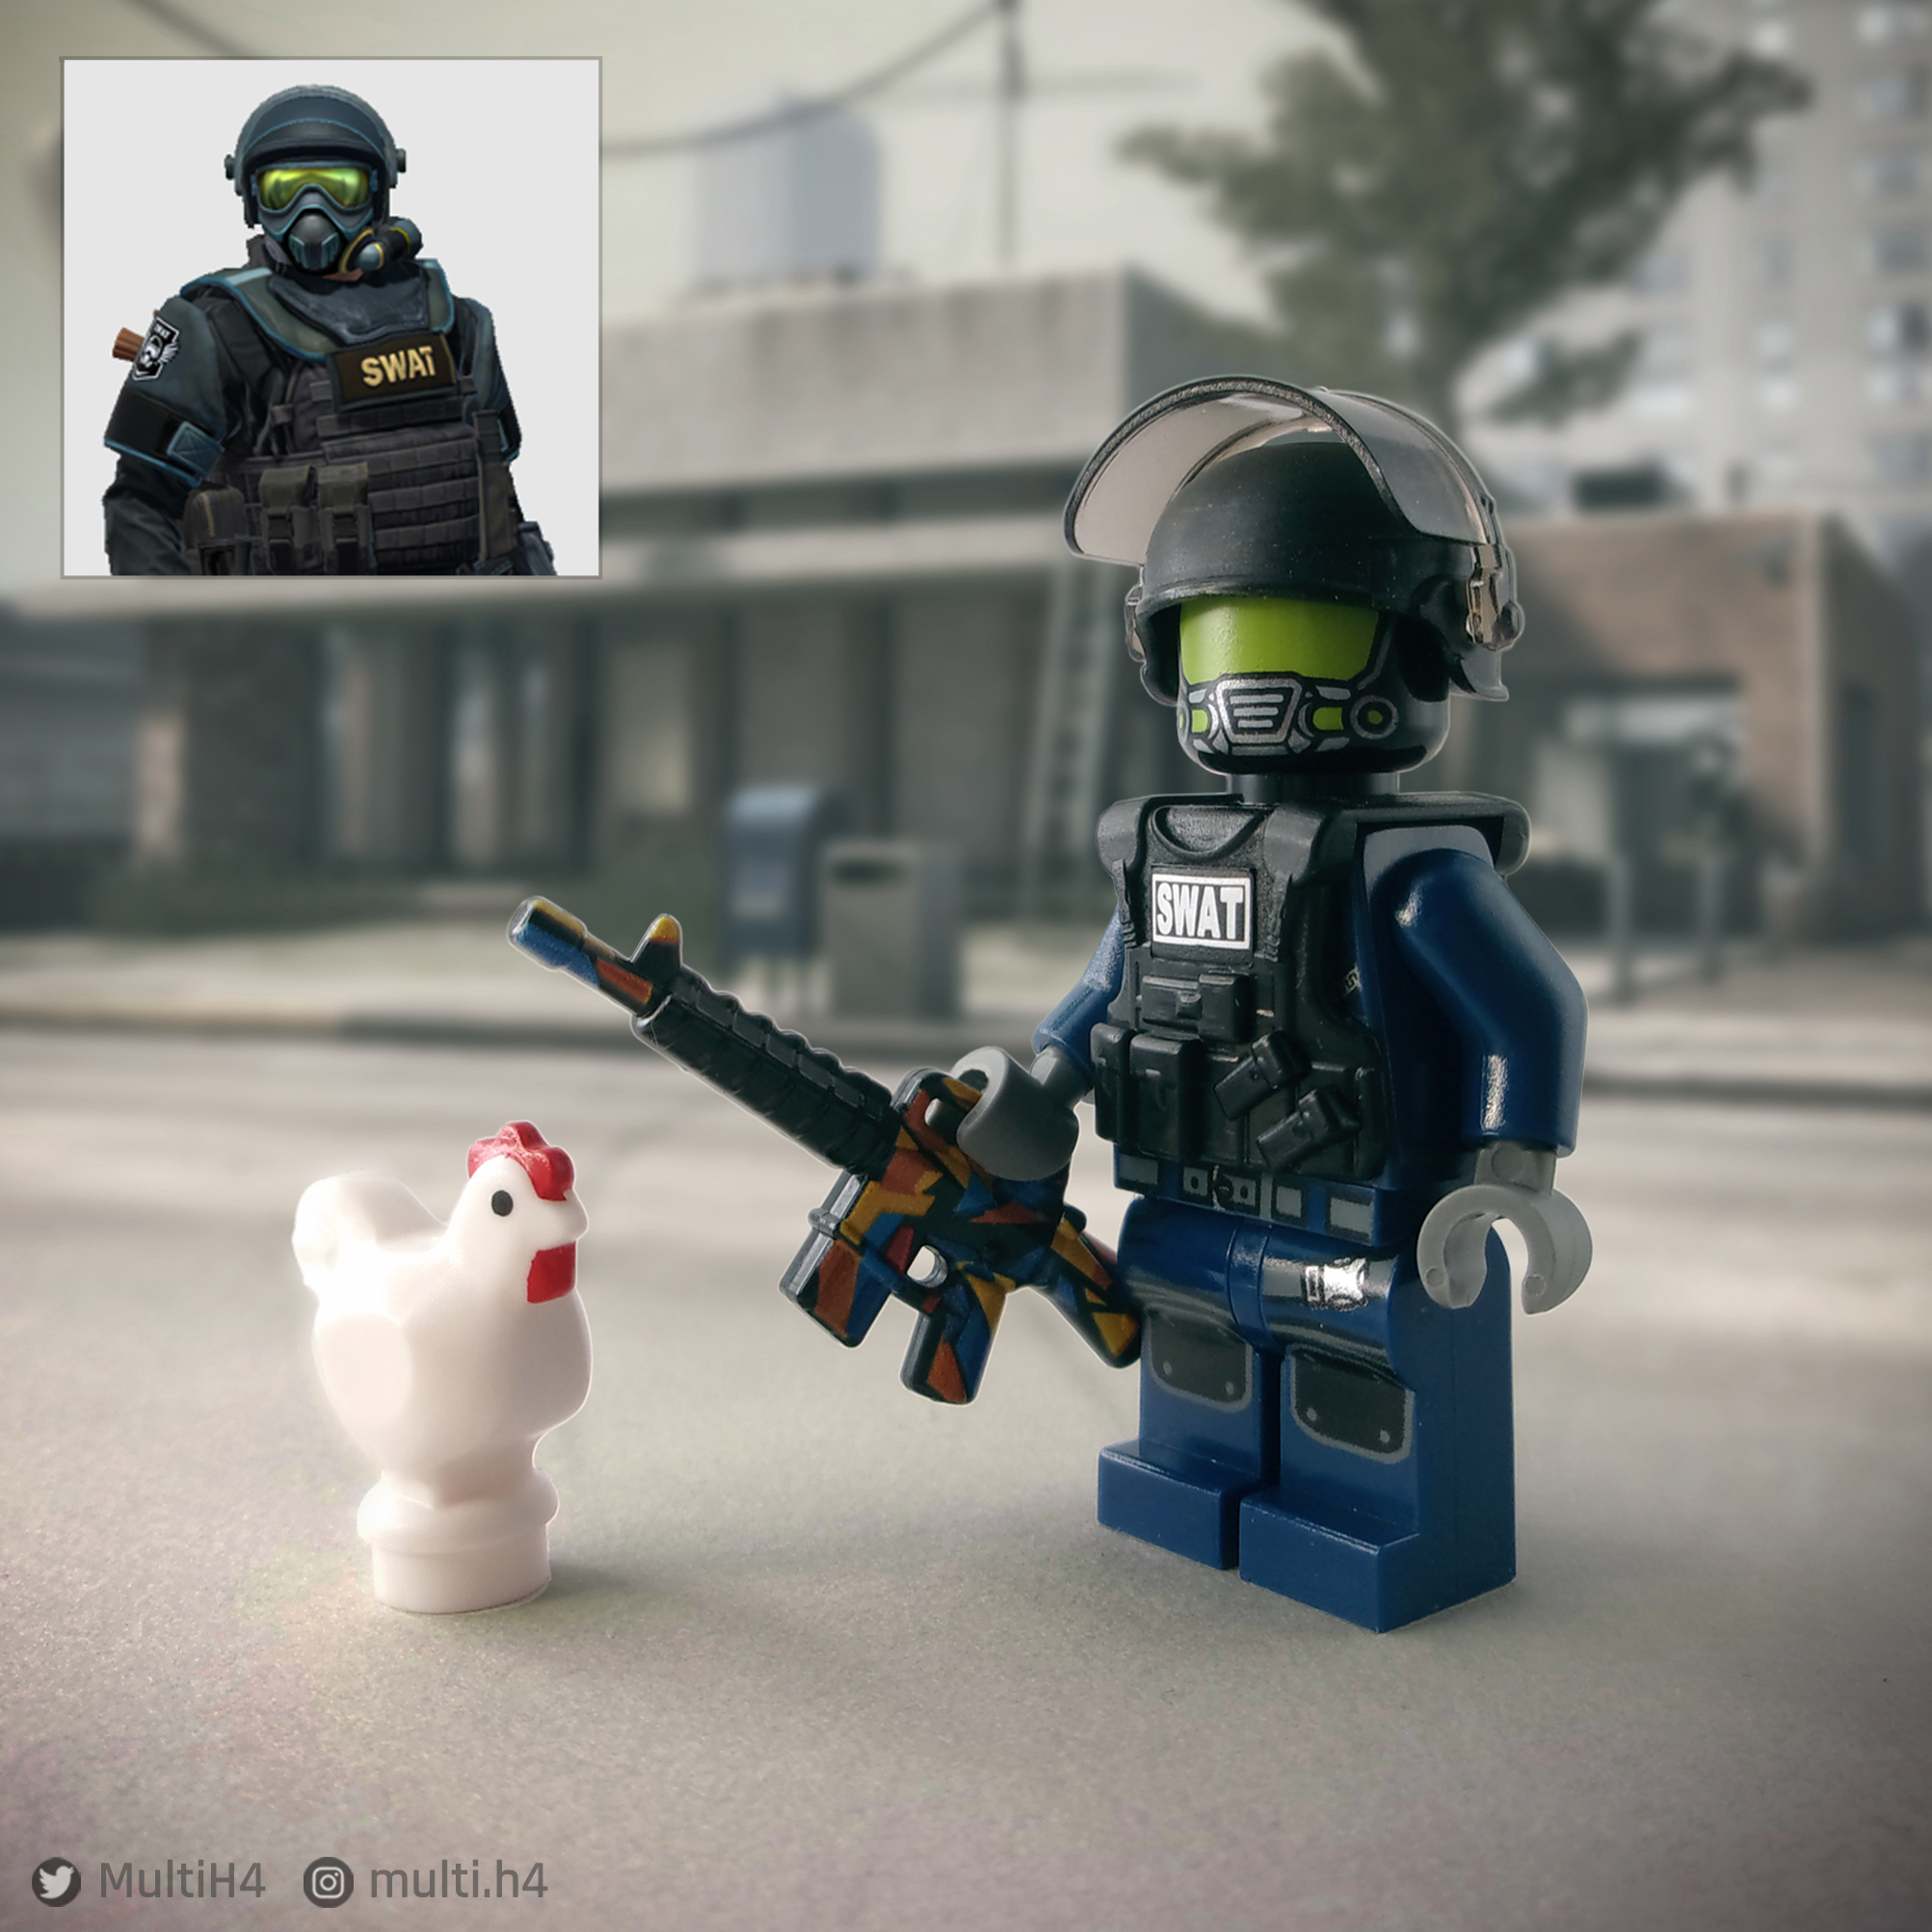 Mere end noget andet bag Zoo om natten MultiH 🌊 on Twitter: "Made another @CounterStrike Lego minifigure, this  time representing the Chem-Haz Specialist accompanied by a chicken friend  of course. https://t.co/7imJisQVV4" / Twitter